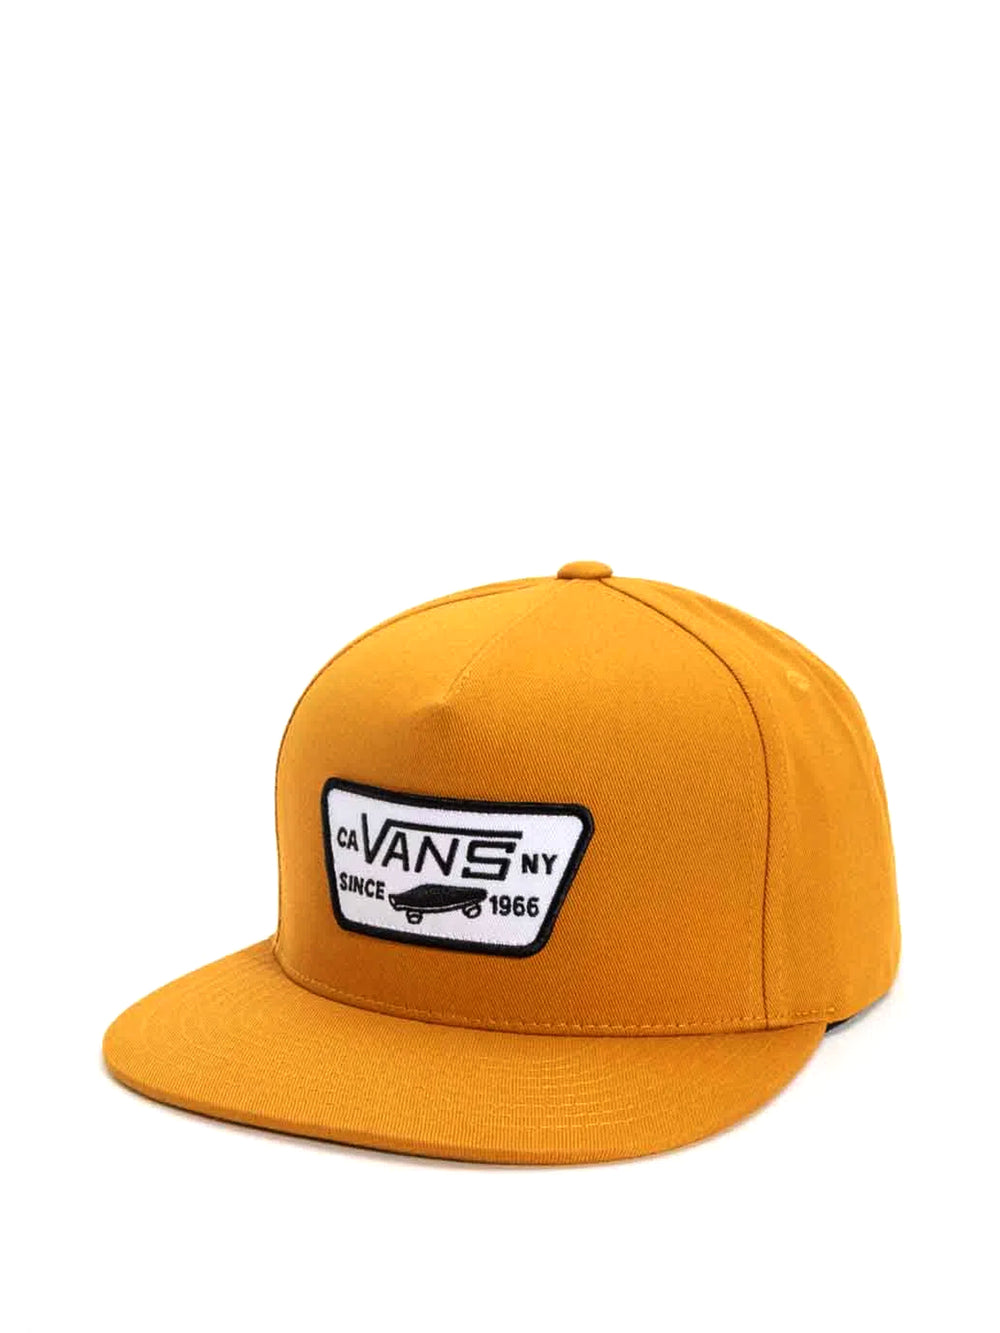 VANS FULL PATCH SNAPBACK HAT - CLEARANCE